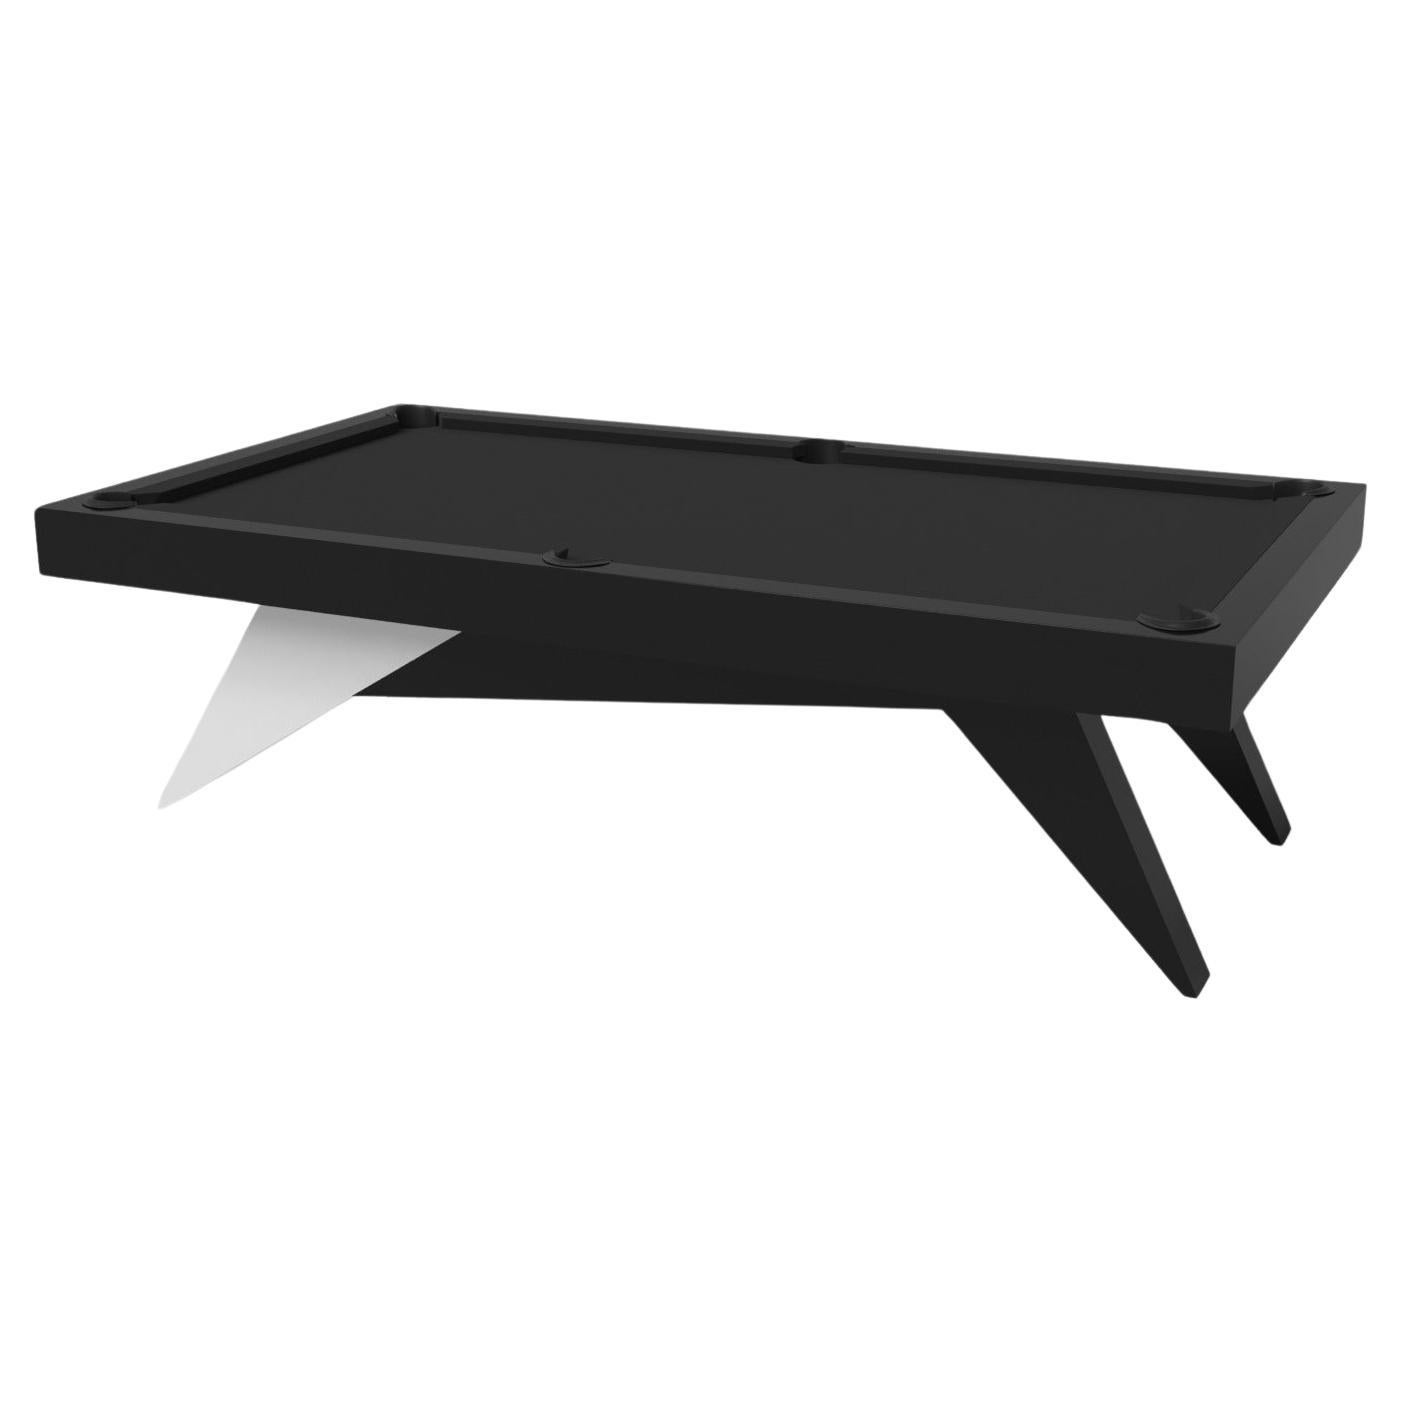 Elevate Customs Mantis Pool Table / Solid Pantone Black in 9' - Made in USA For Sale